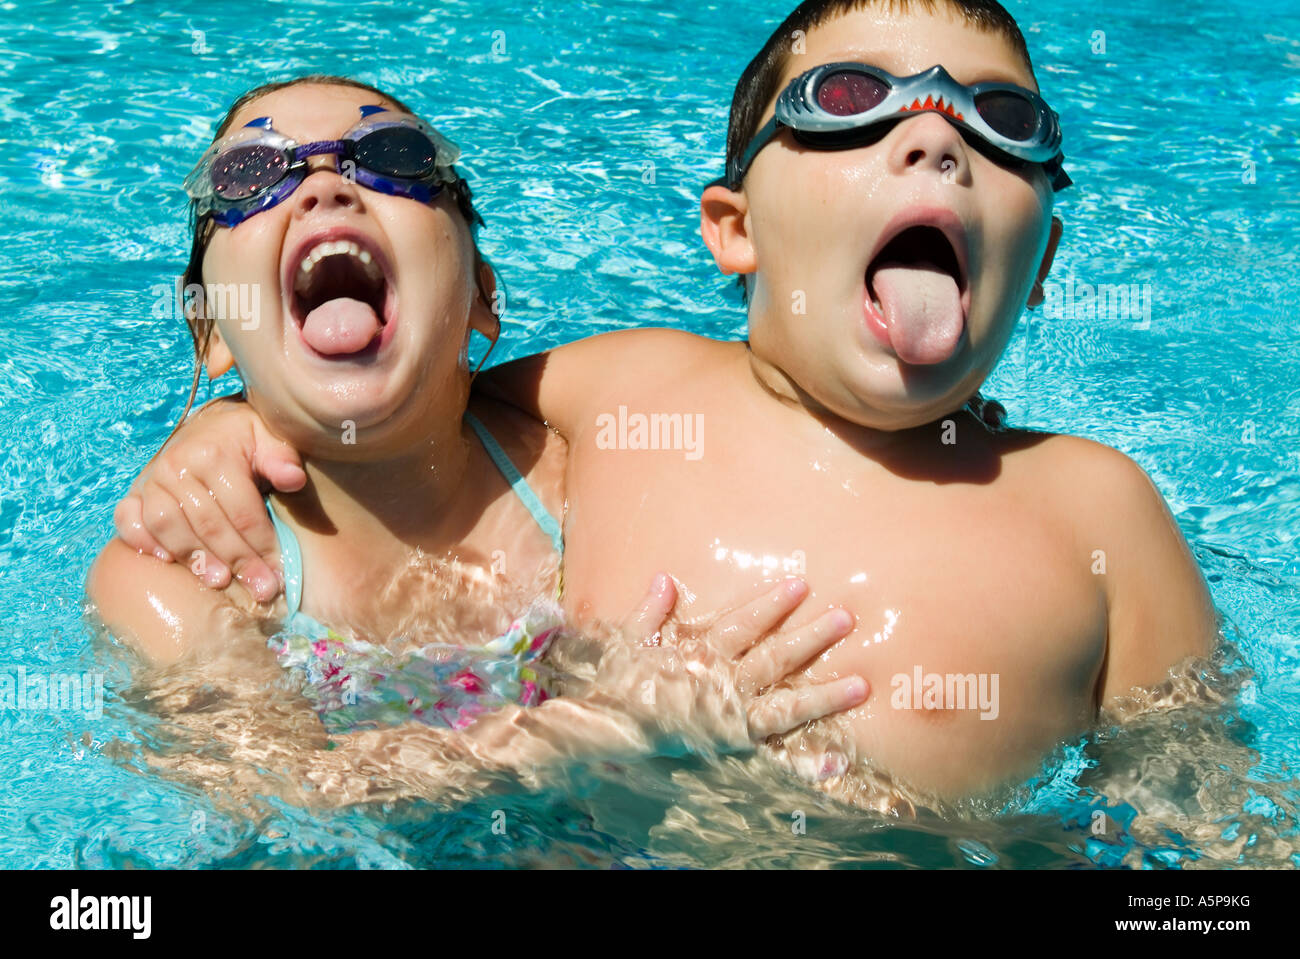 Boy and girl laughing and playing in swimming pool. Stock Photo